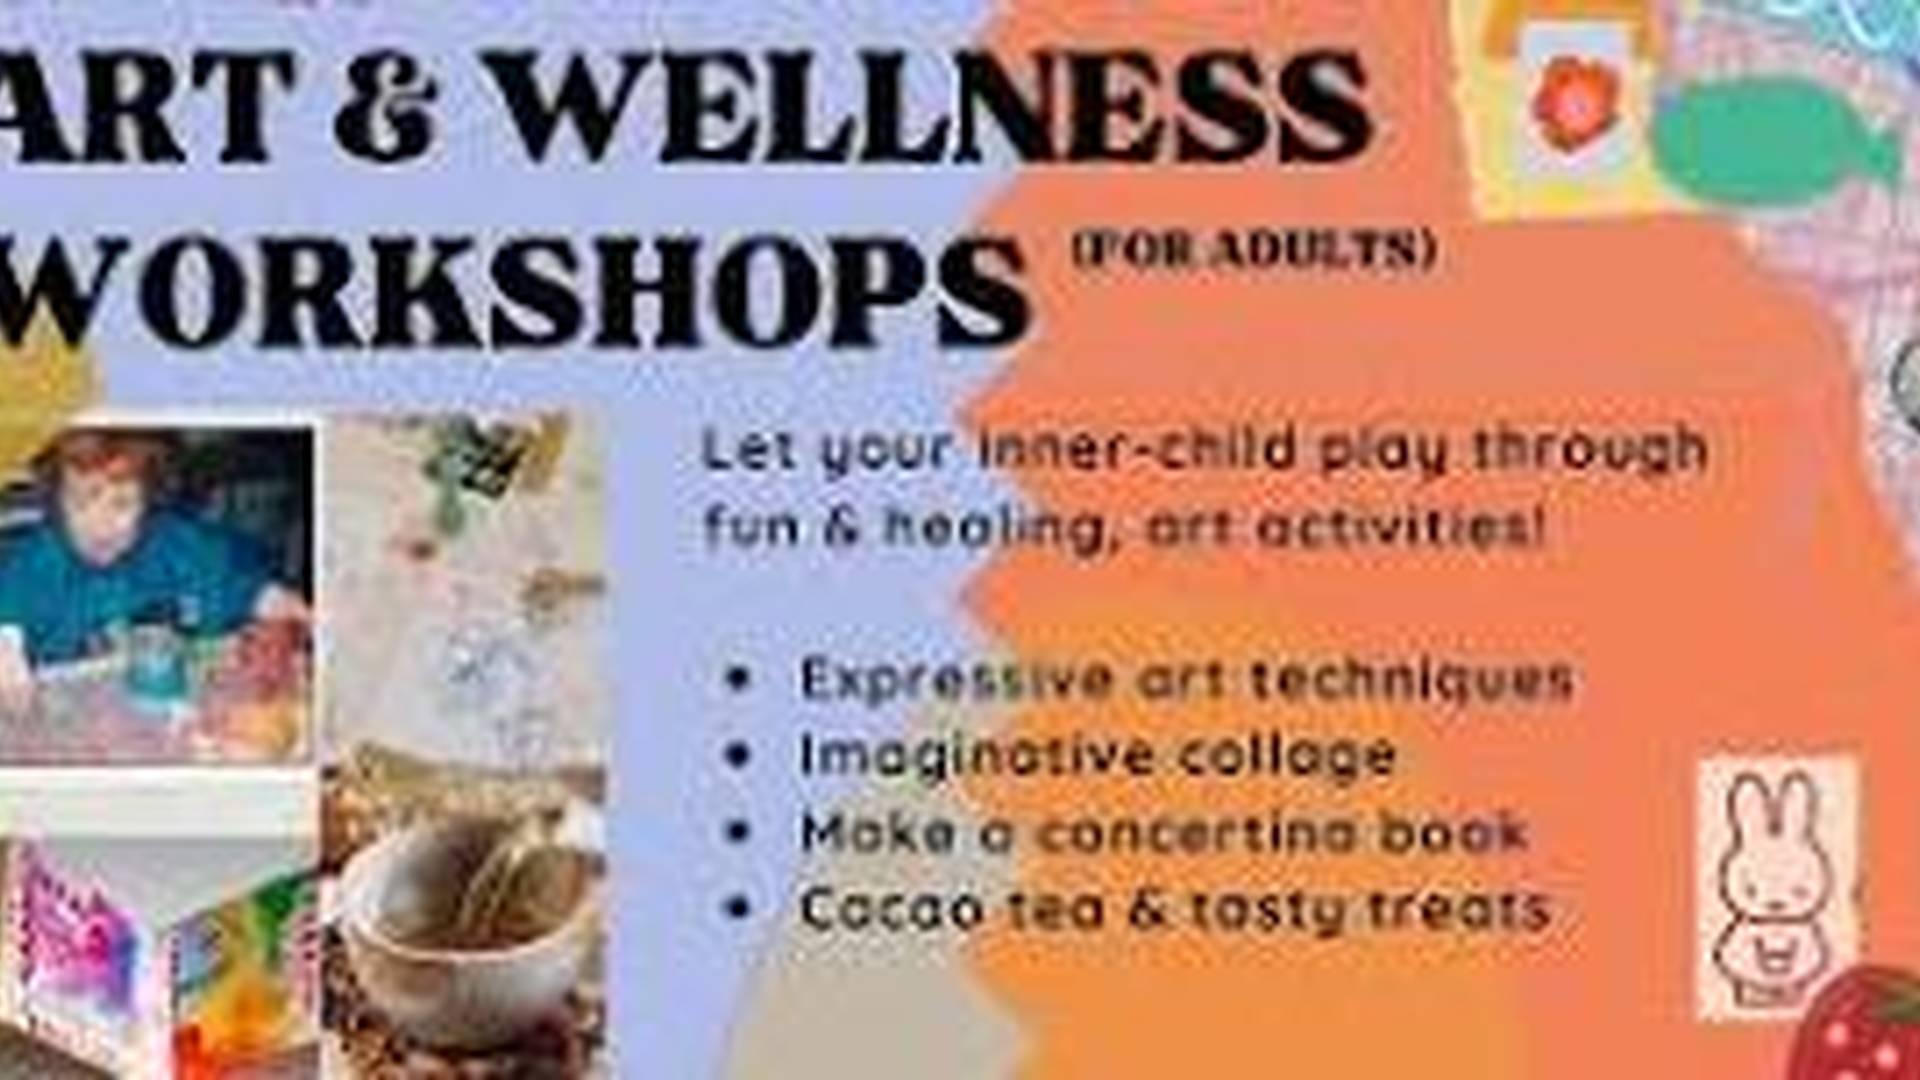 Copy of Express your Inner-Child Art and Wellness Workshop photo